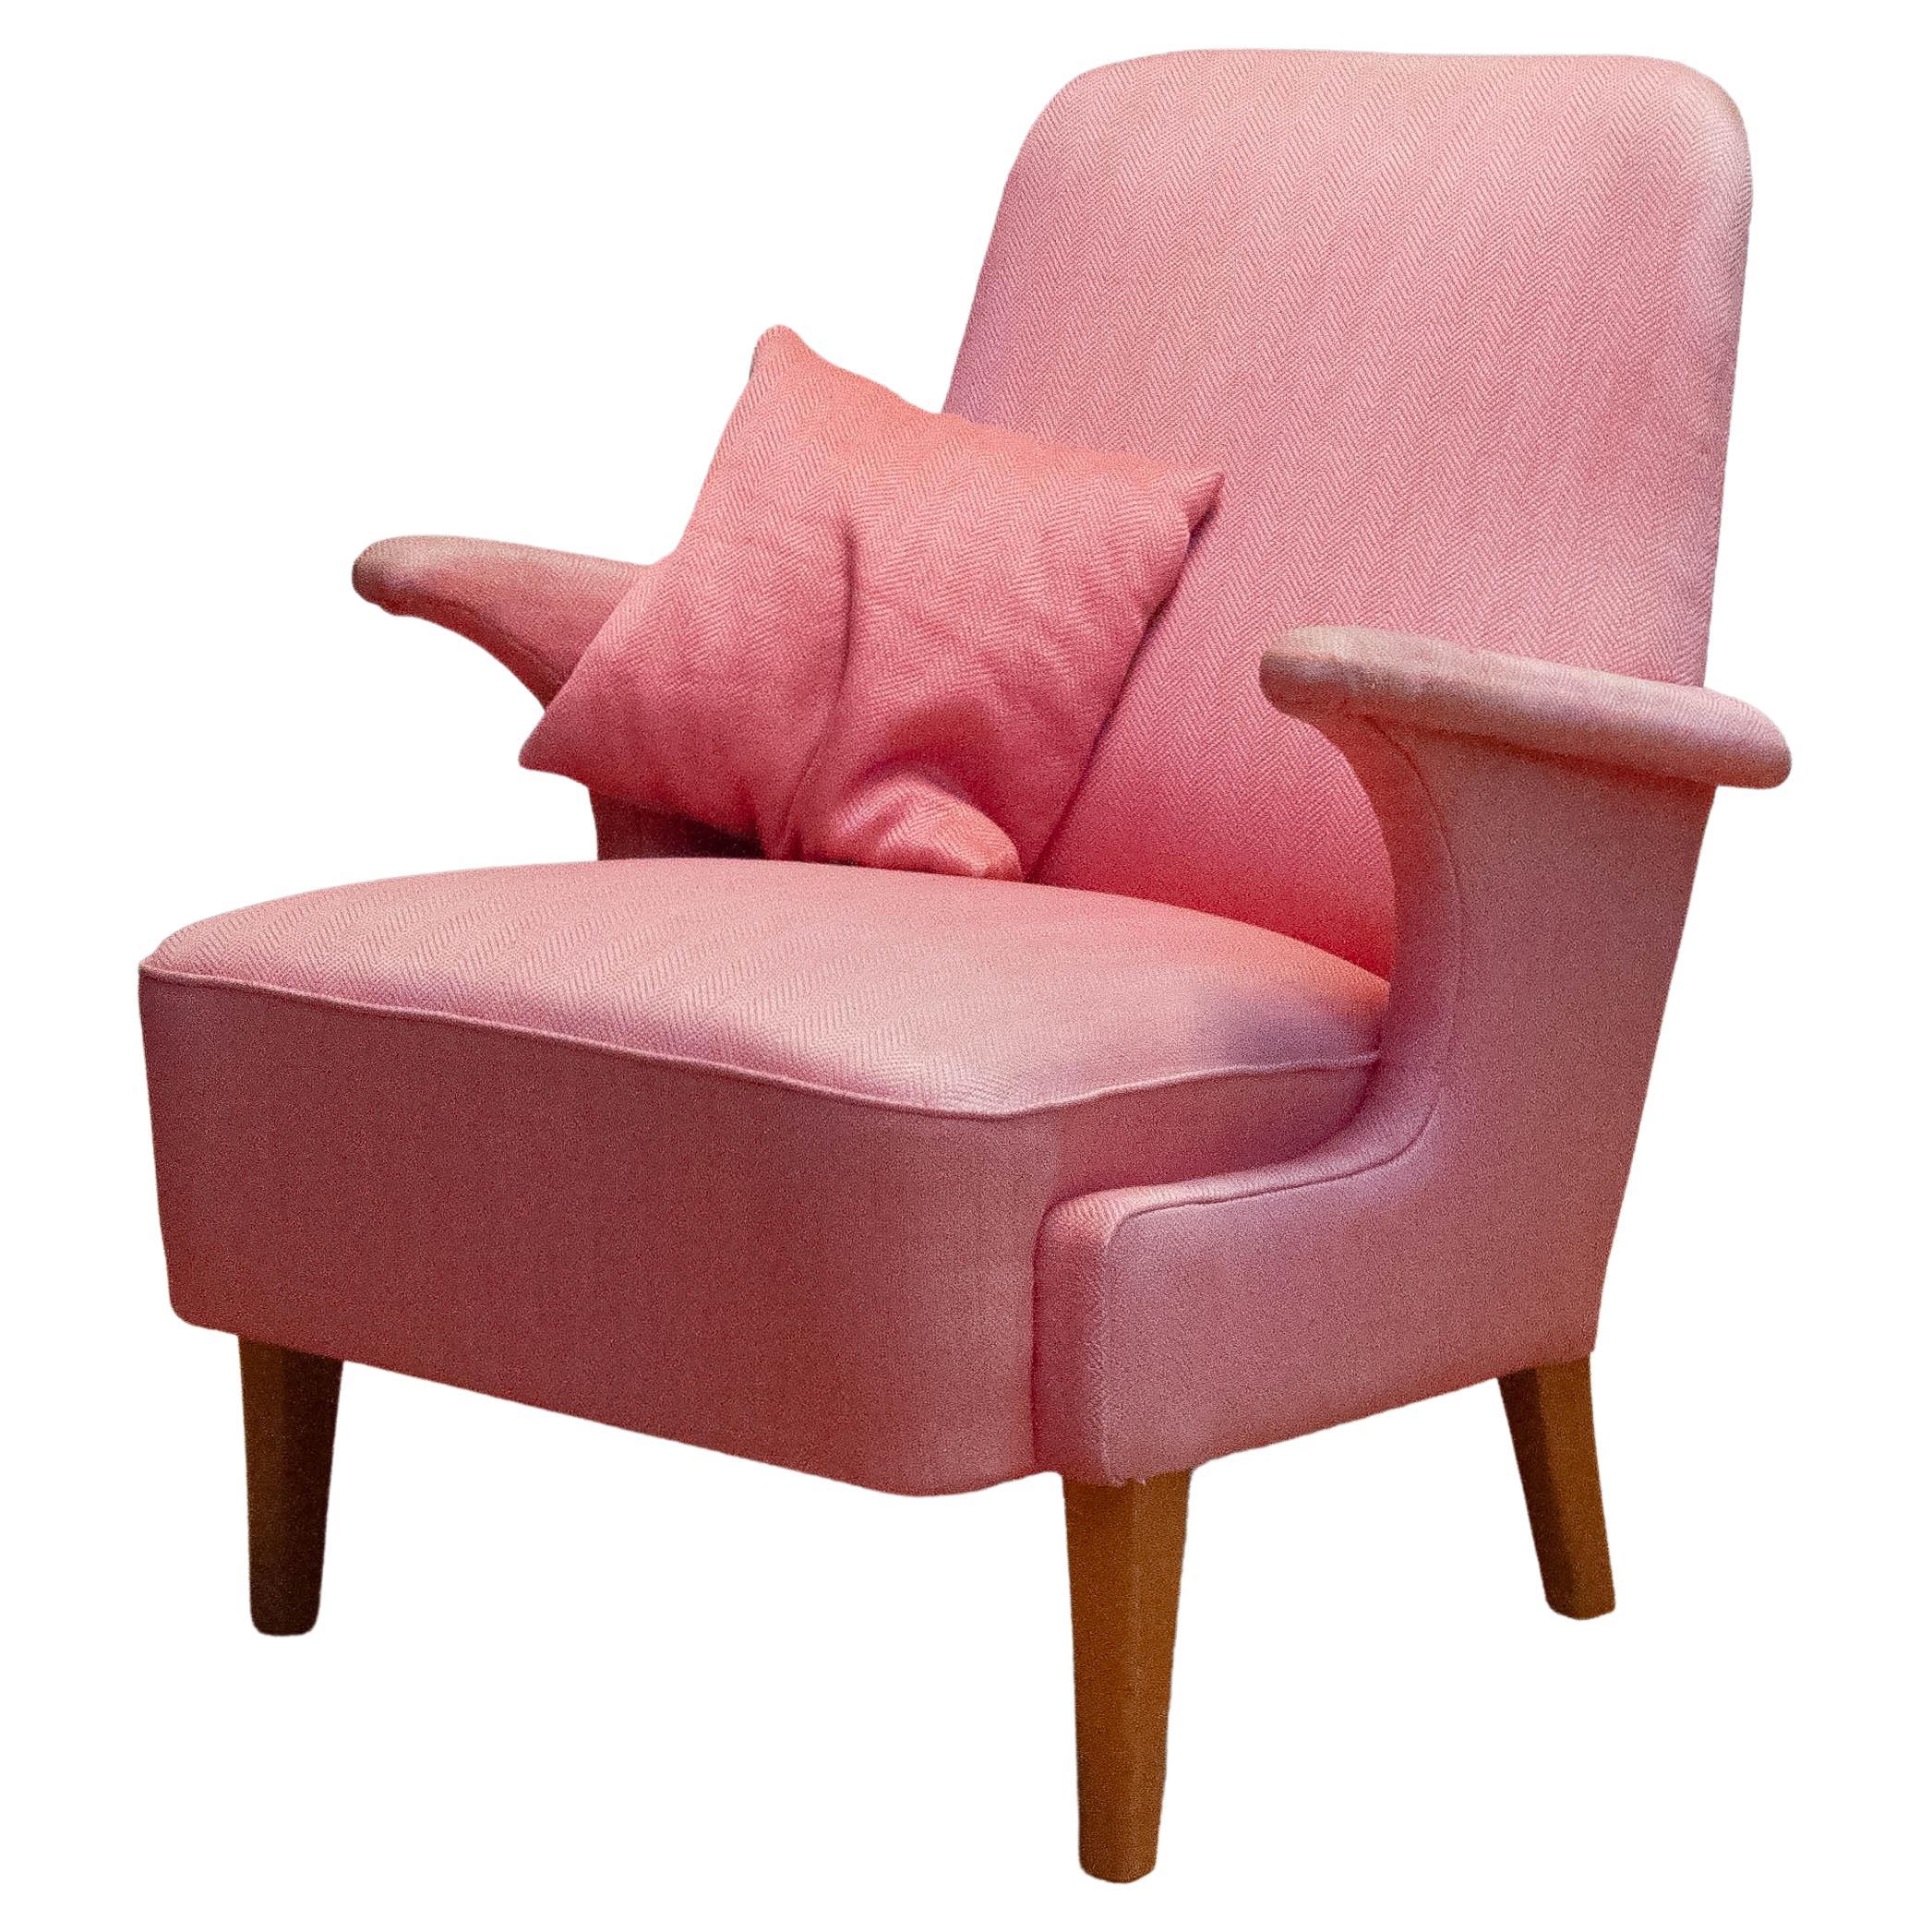 1950 Armchair / Lounge Chair With Powder Pink Wool Upholstery By Dux From Sweden For Sale